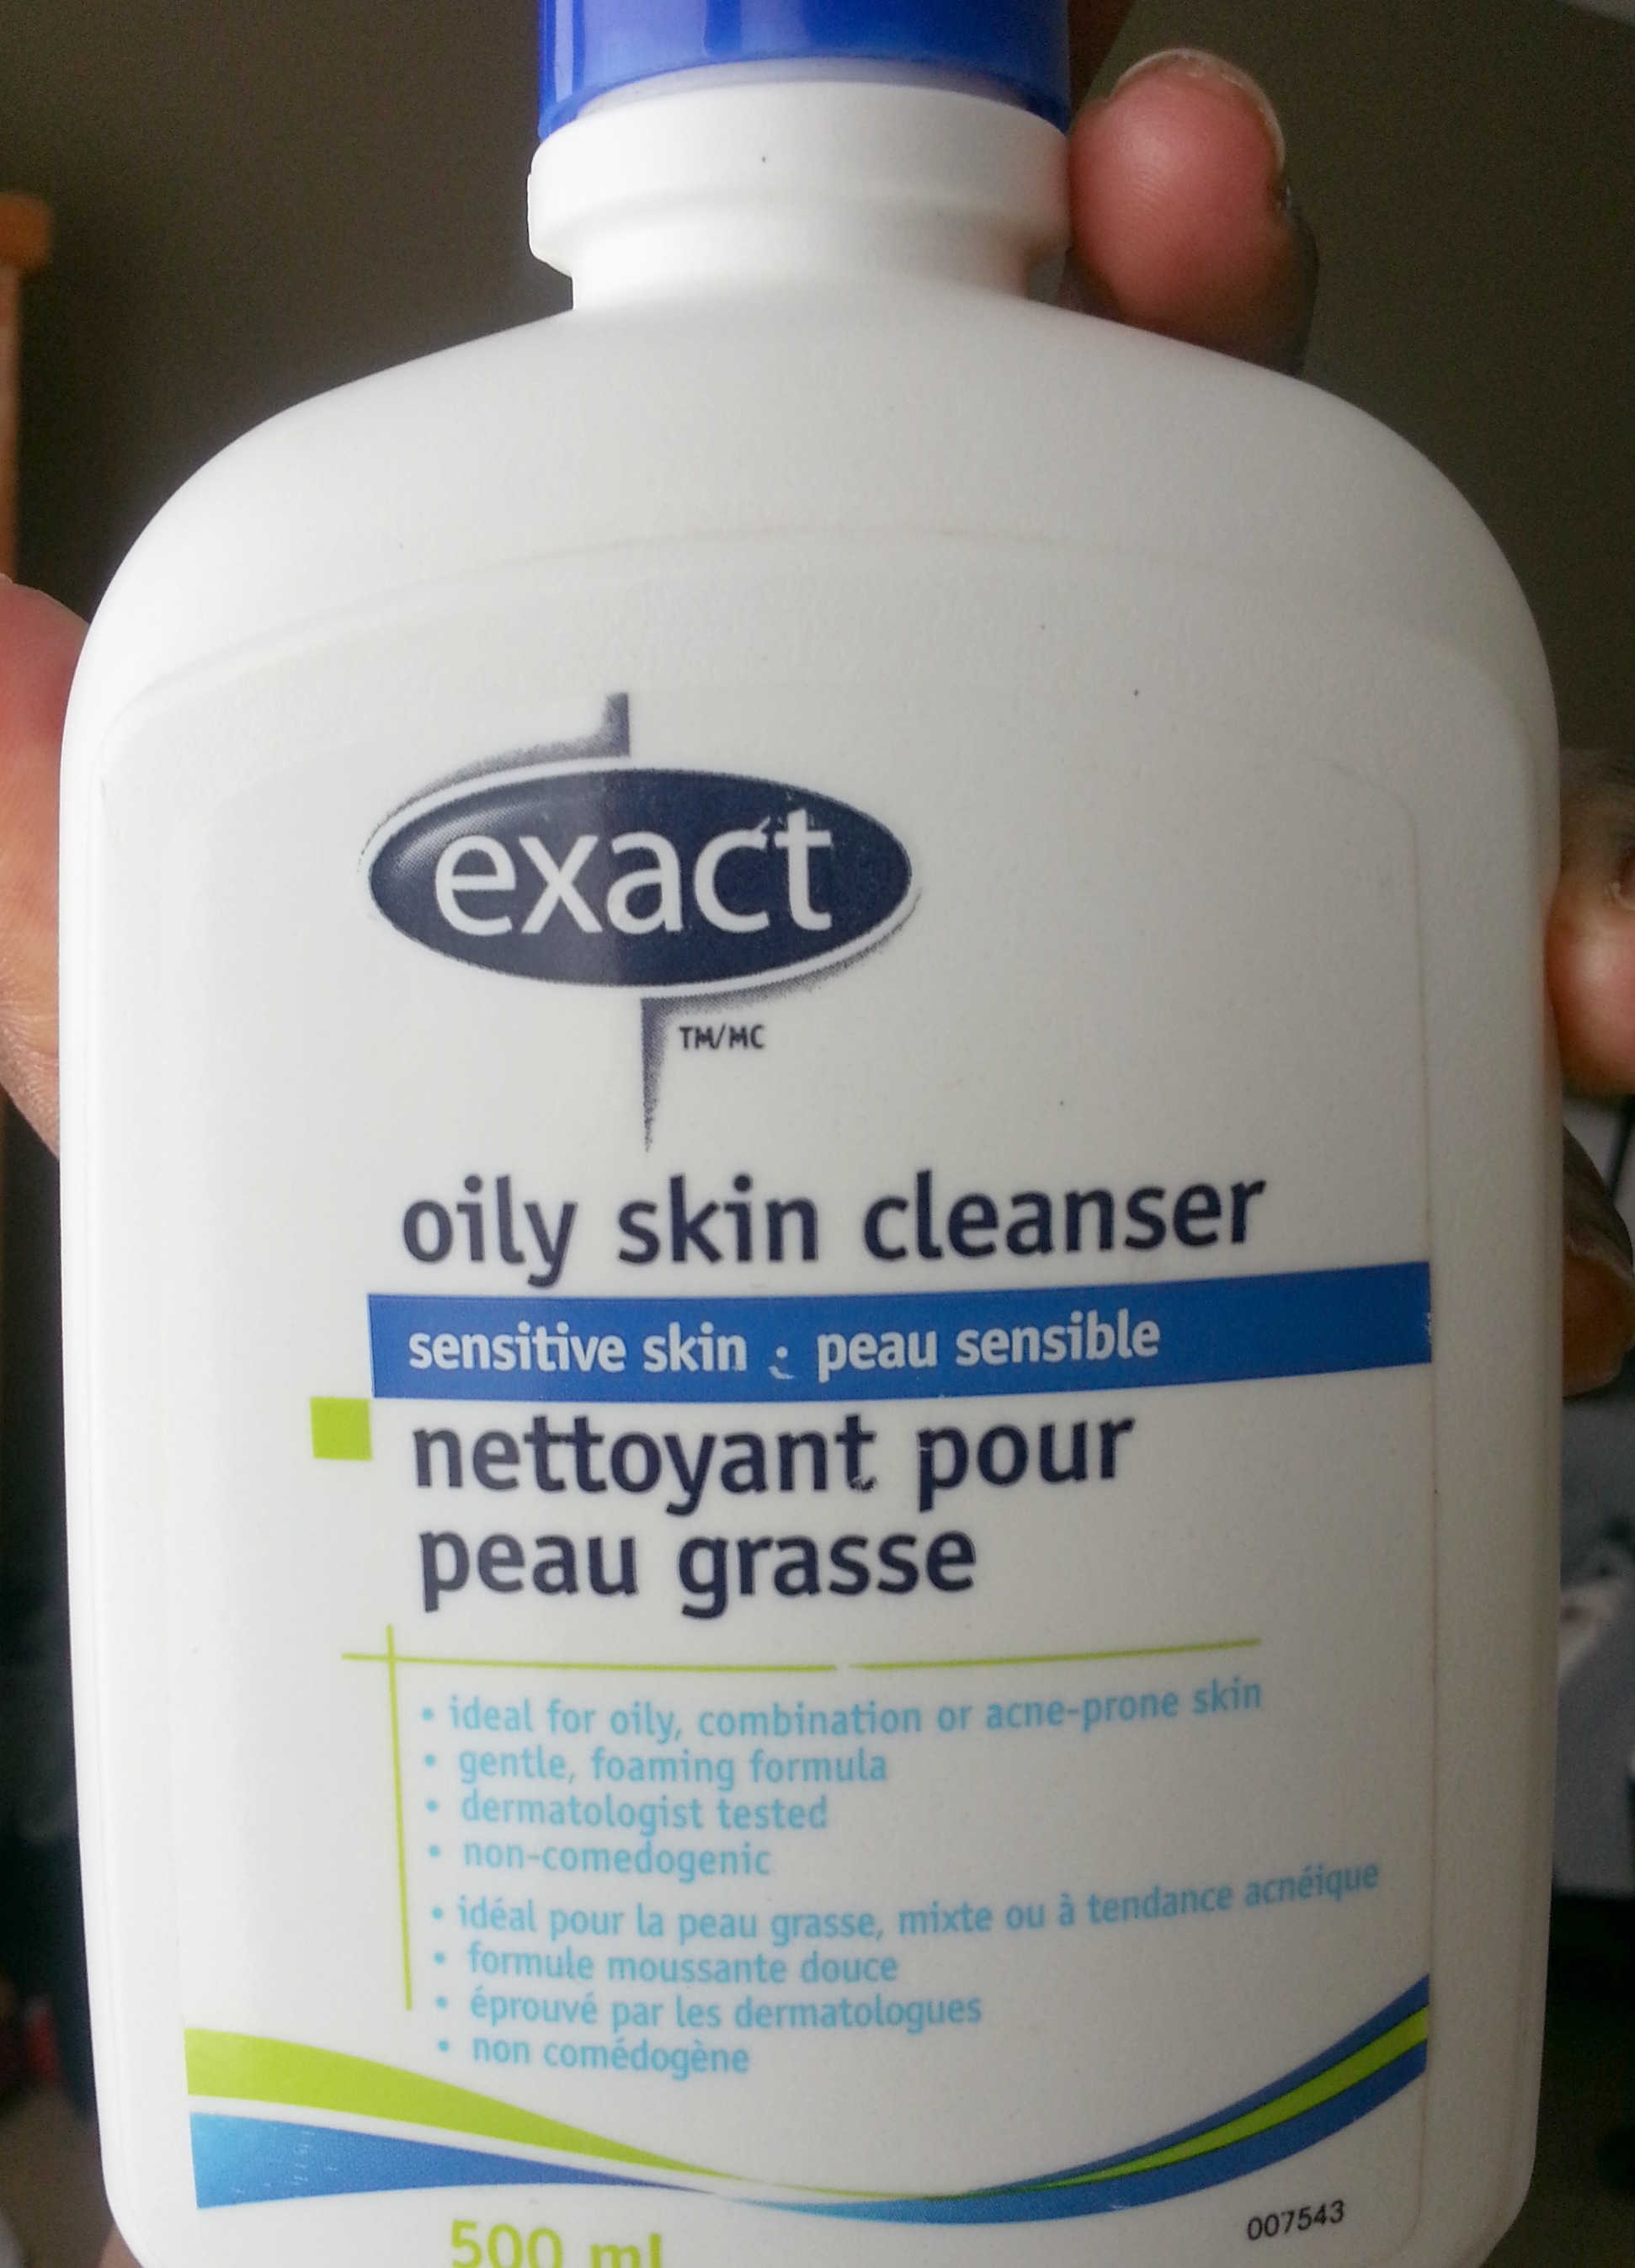 A Good Cleanser for oily/acne prone skin - by Exact